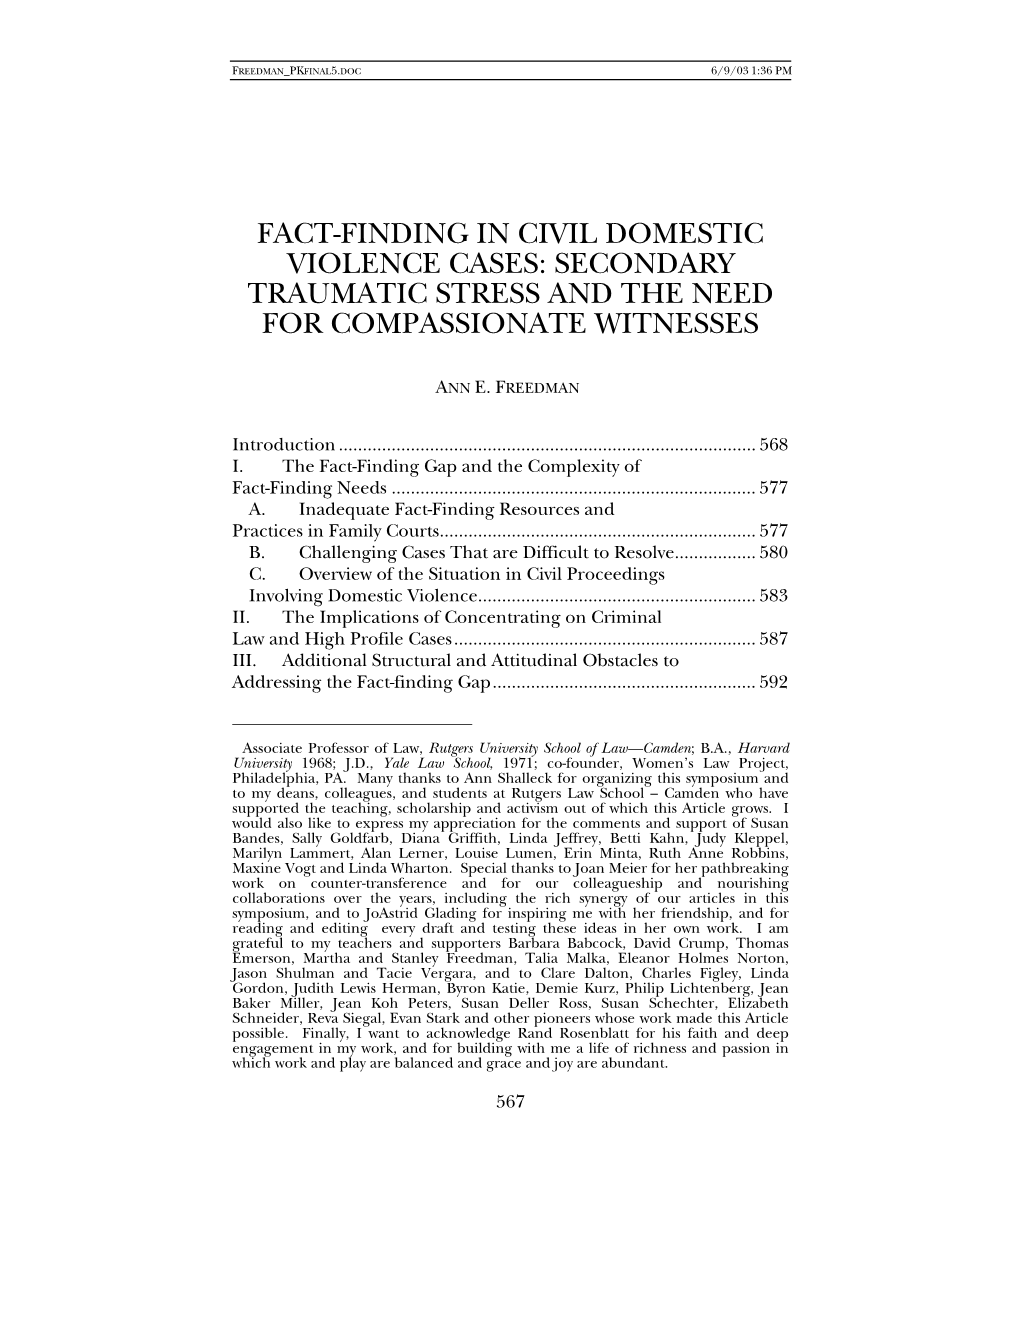 Fact-Finding in Civil Domestic Violence Cases: Secondary Traumatic Stress and the Need for Compassionate Witnesses